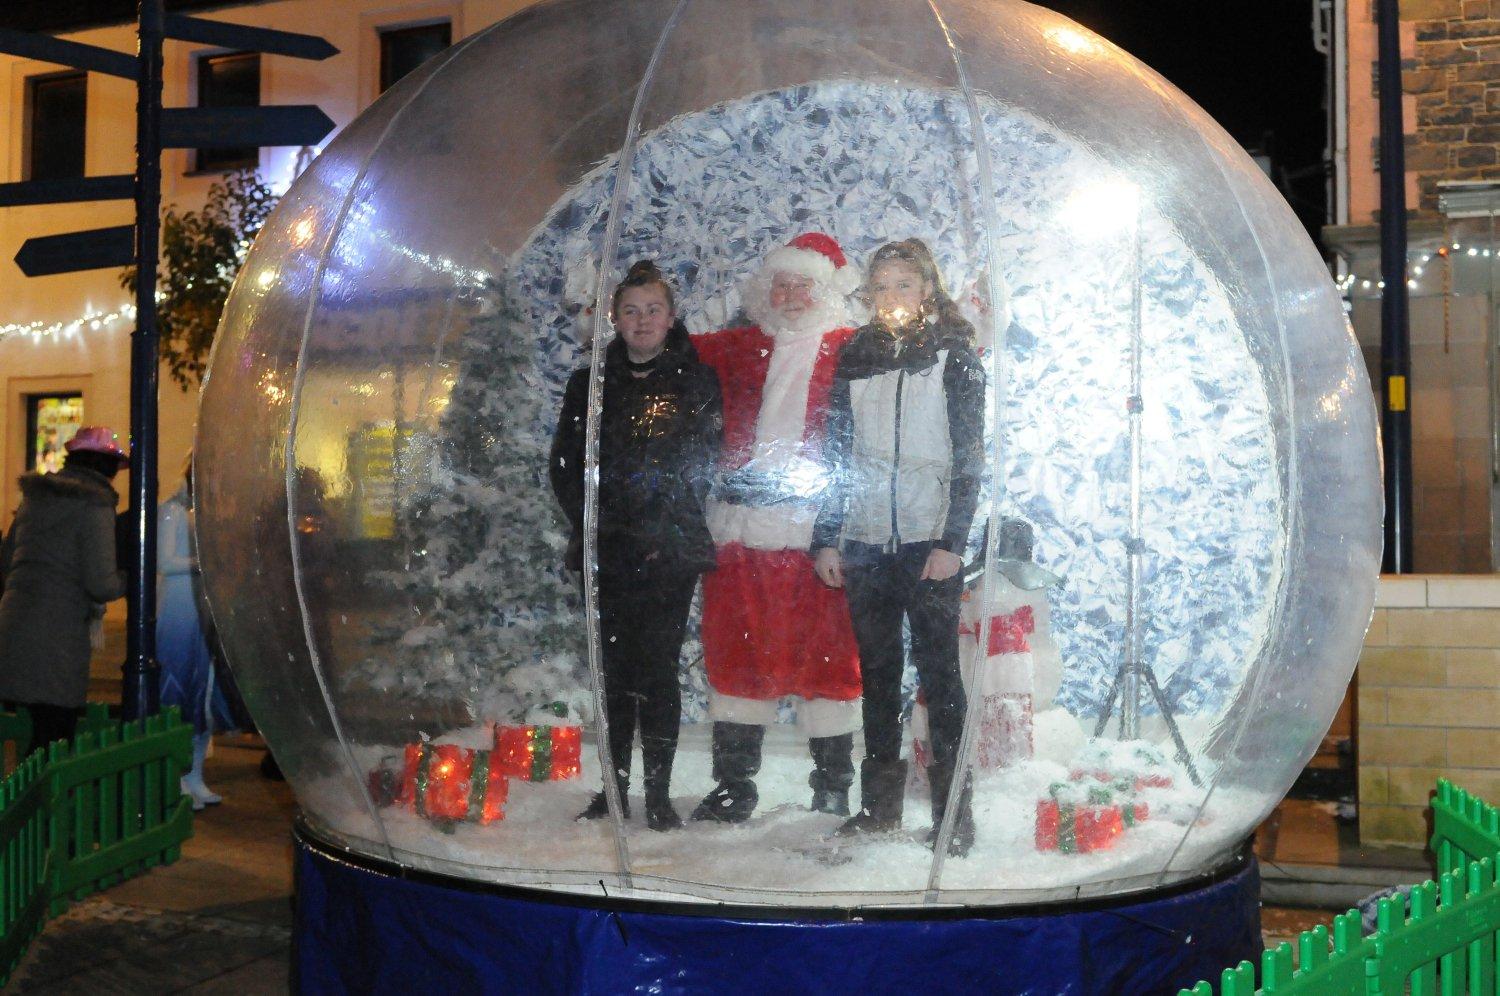 Santa paid a visit to the snow globe with these two lucky youngsters.